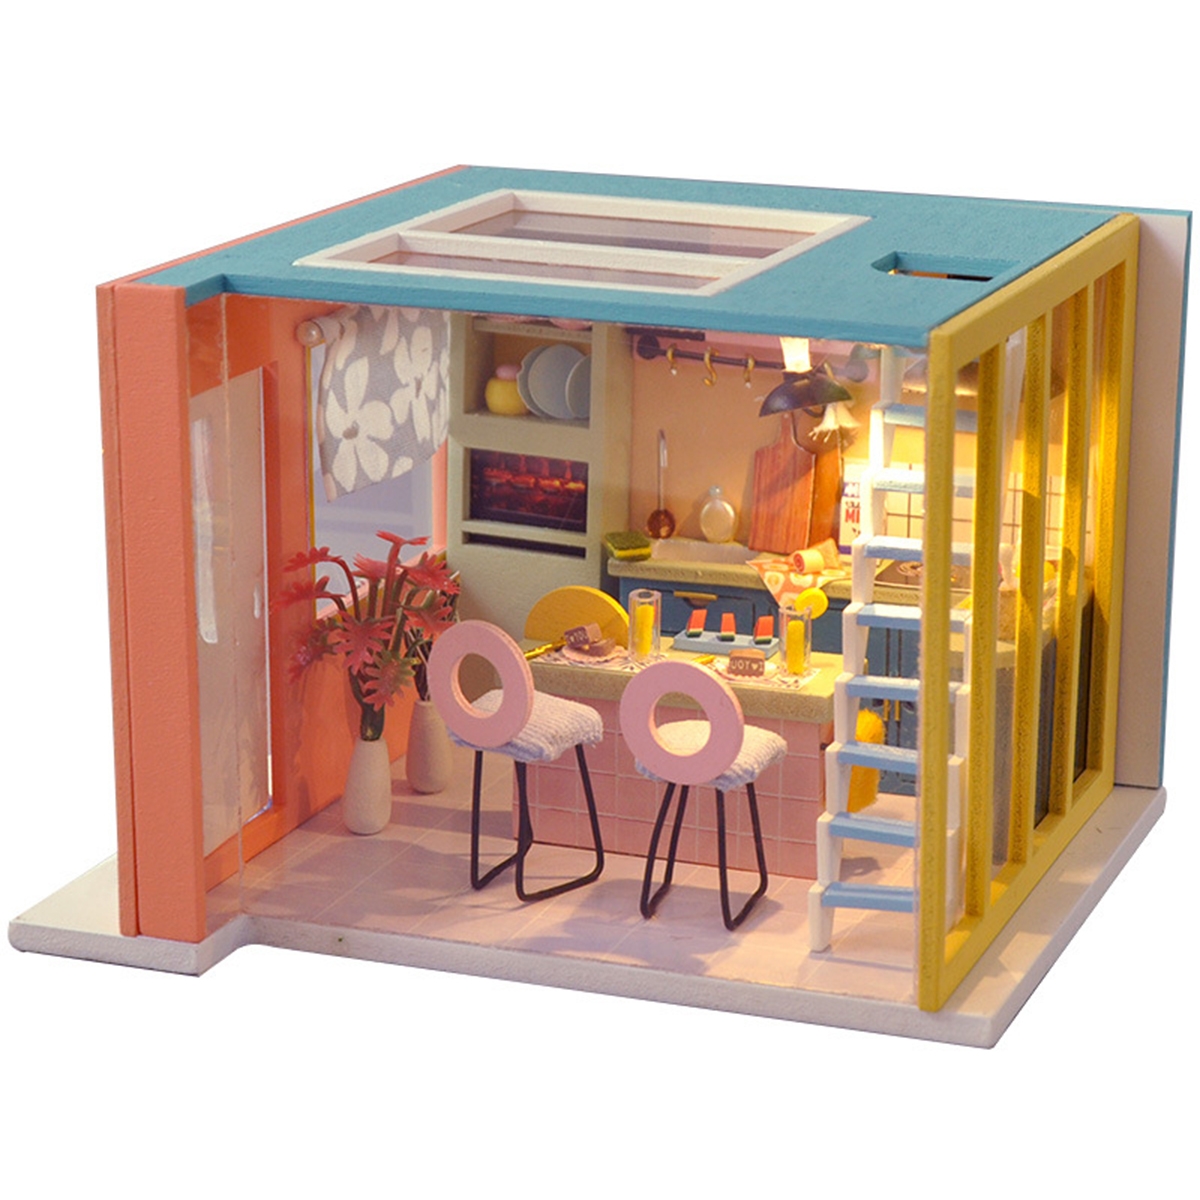 Wooden Kitchen DIY Handmade Assemble Doll House Miniature Furniture Kit Education Toy with LED Light for Kids Gift Collection - Photo: 1